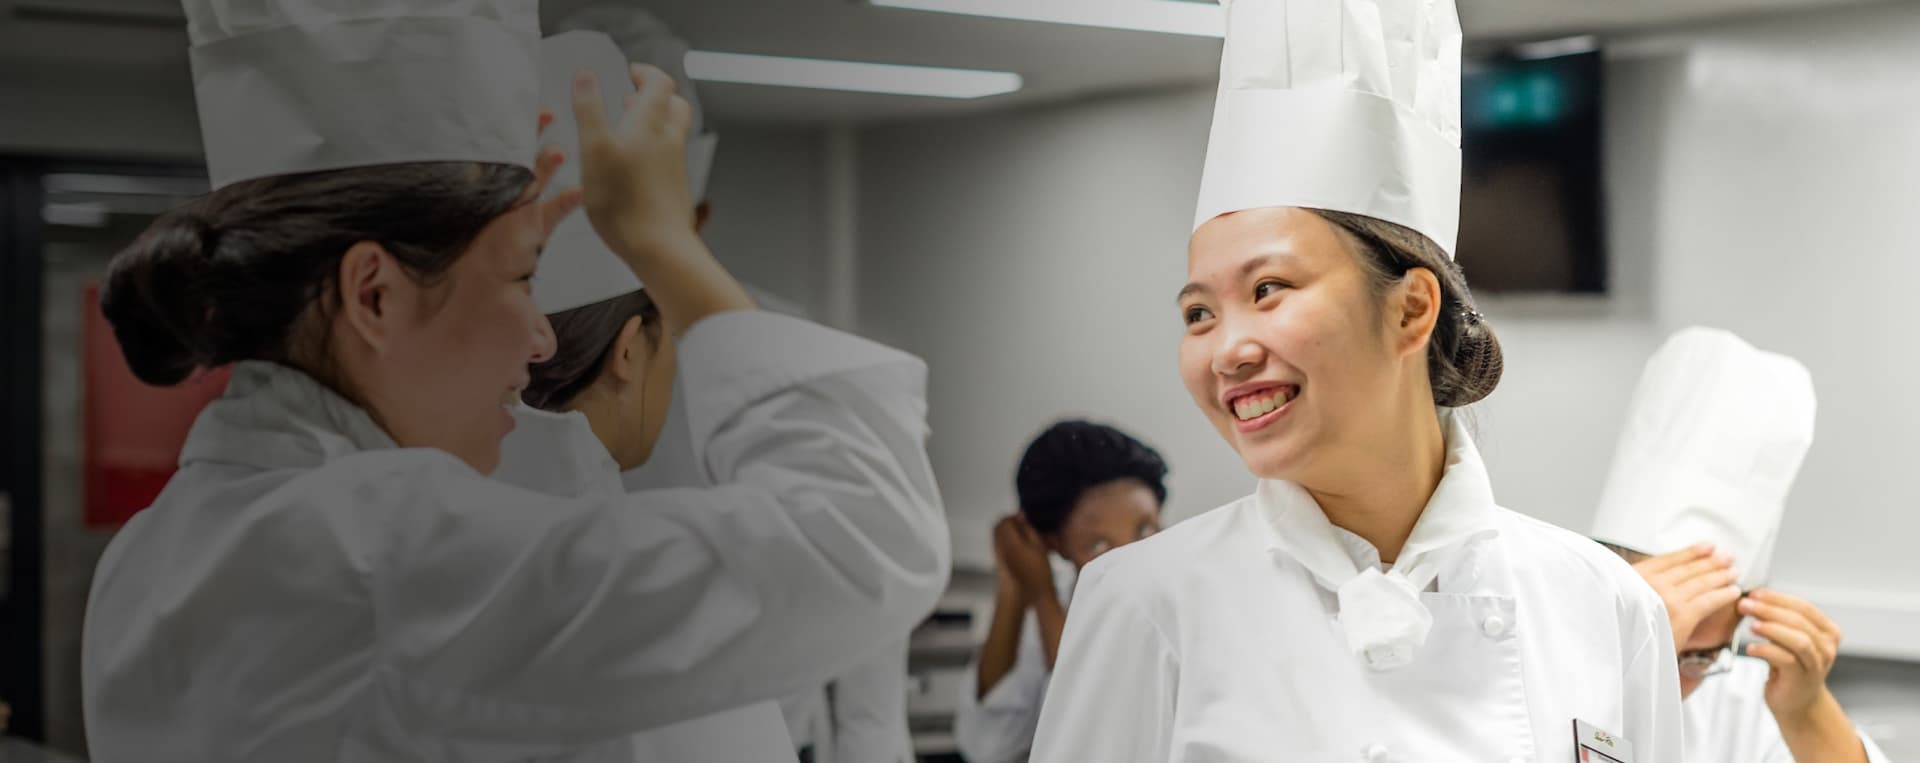 types of culinary degrees, culinary degree types, colleges that offer bachelor's degree in culinary arts, bachelors in culinary arts online